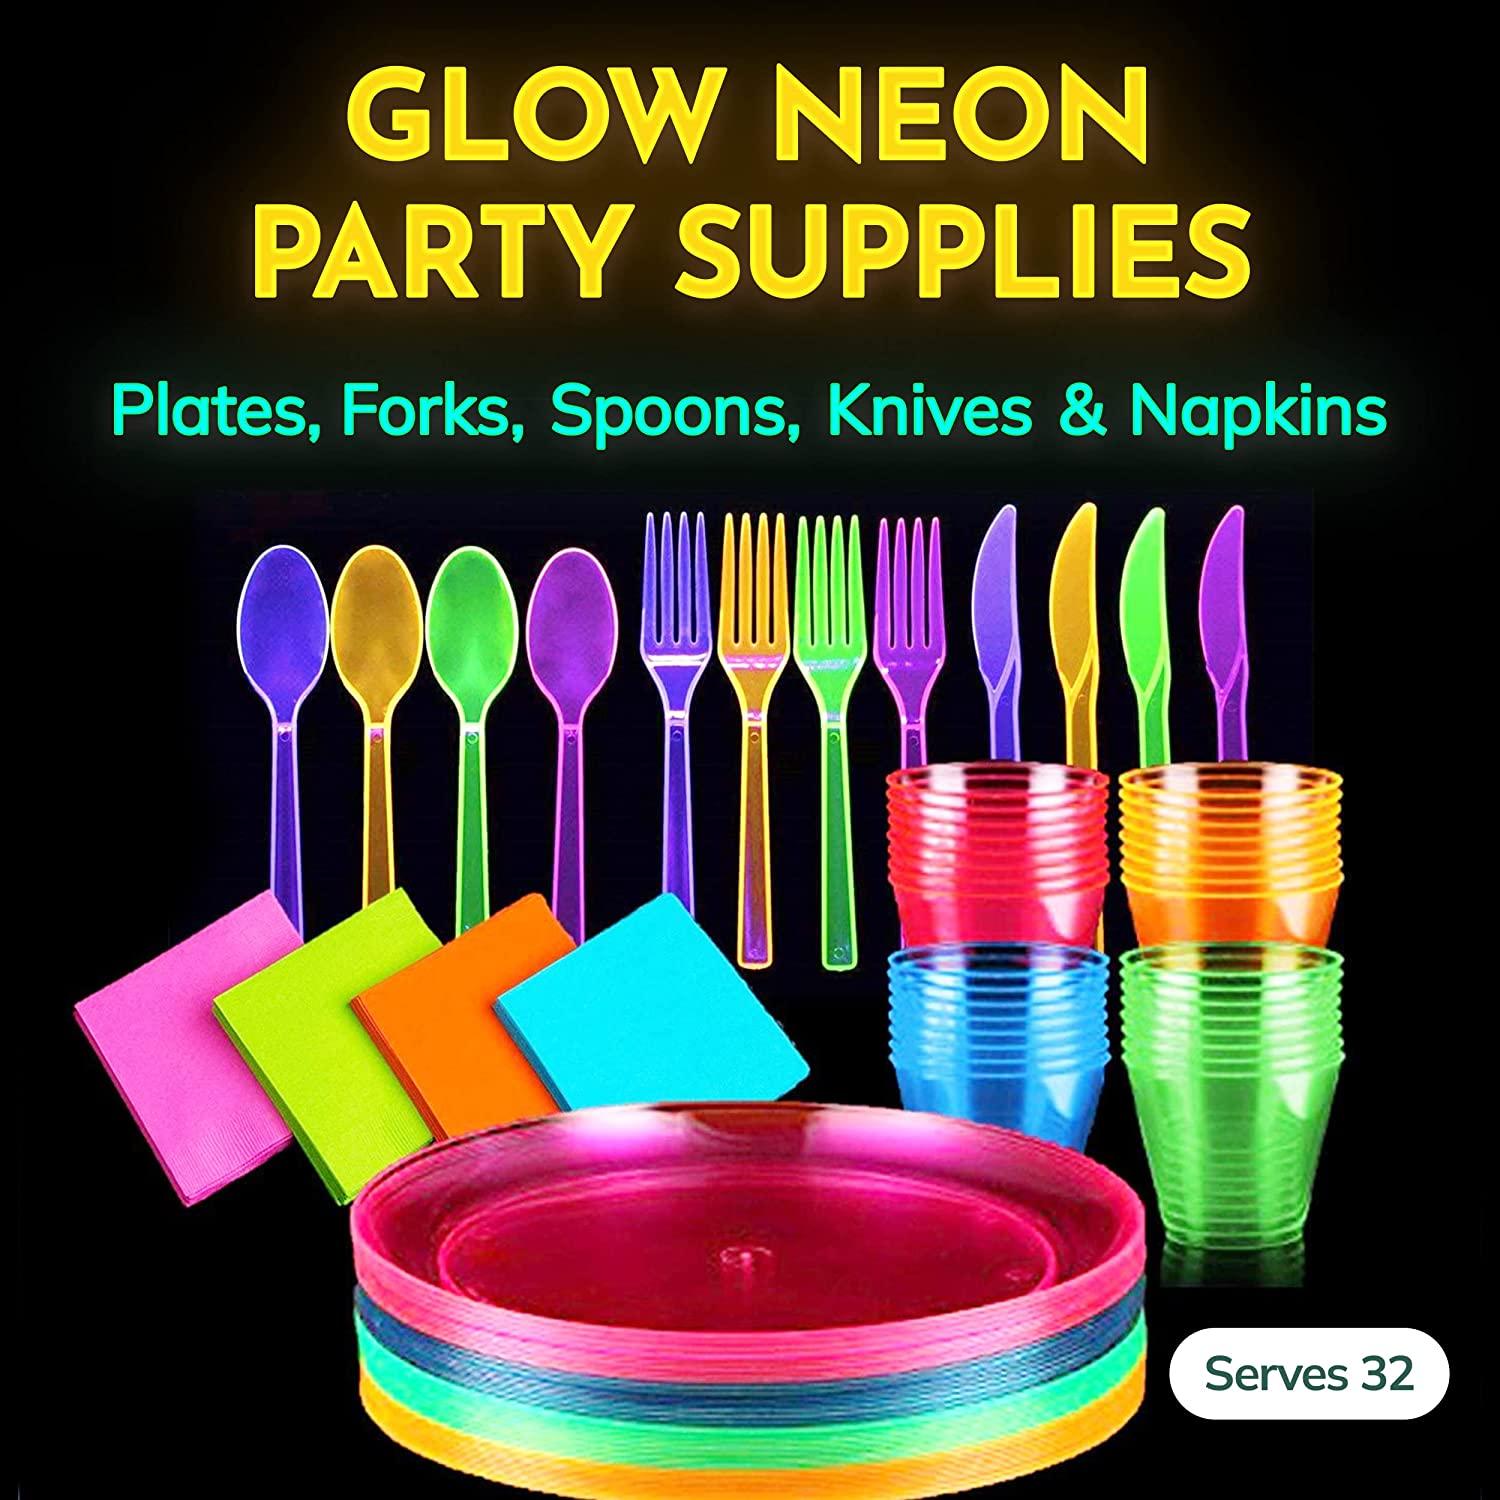 Glow Neon Party Supplies - Serves 32, Hard Plastic Disposable Neon Party  Plates, Napkins, Cups Tumblers, Cutlery Forks Knives Spoons, Glow in the Dark  Neon Party Fiesta Plates Encanto Birthday Party Complete